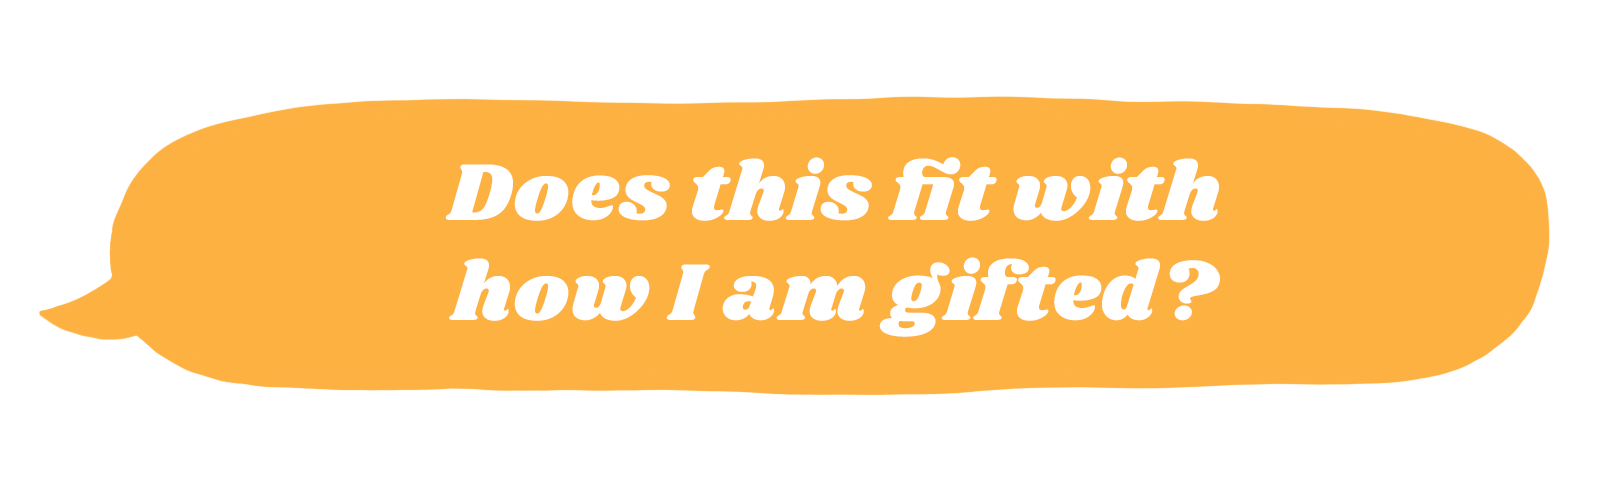 Does this fit with how I am gifted?